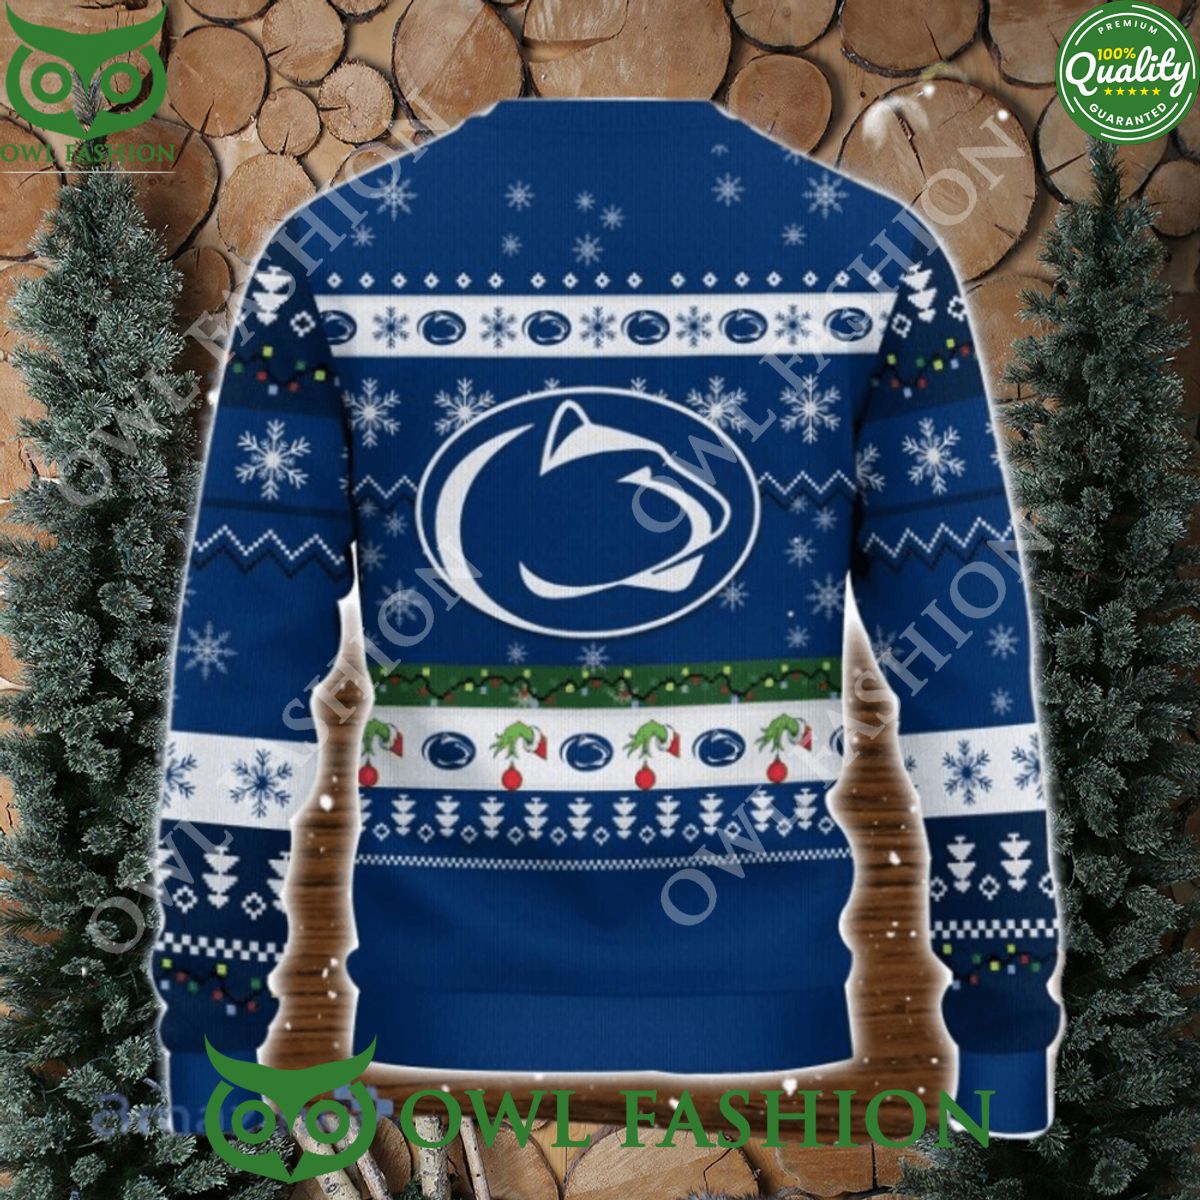 penn state nittany lions ncaa grinch hand funny ugly christmas sweater jumper 1 W1F5e.jpg